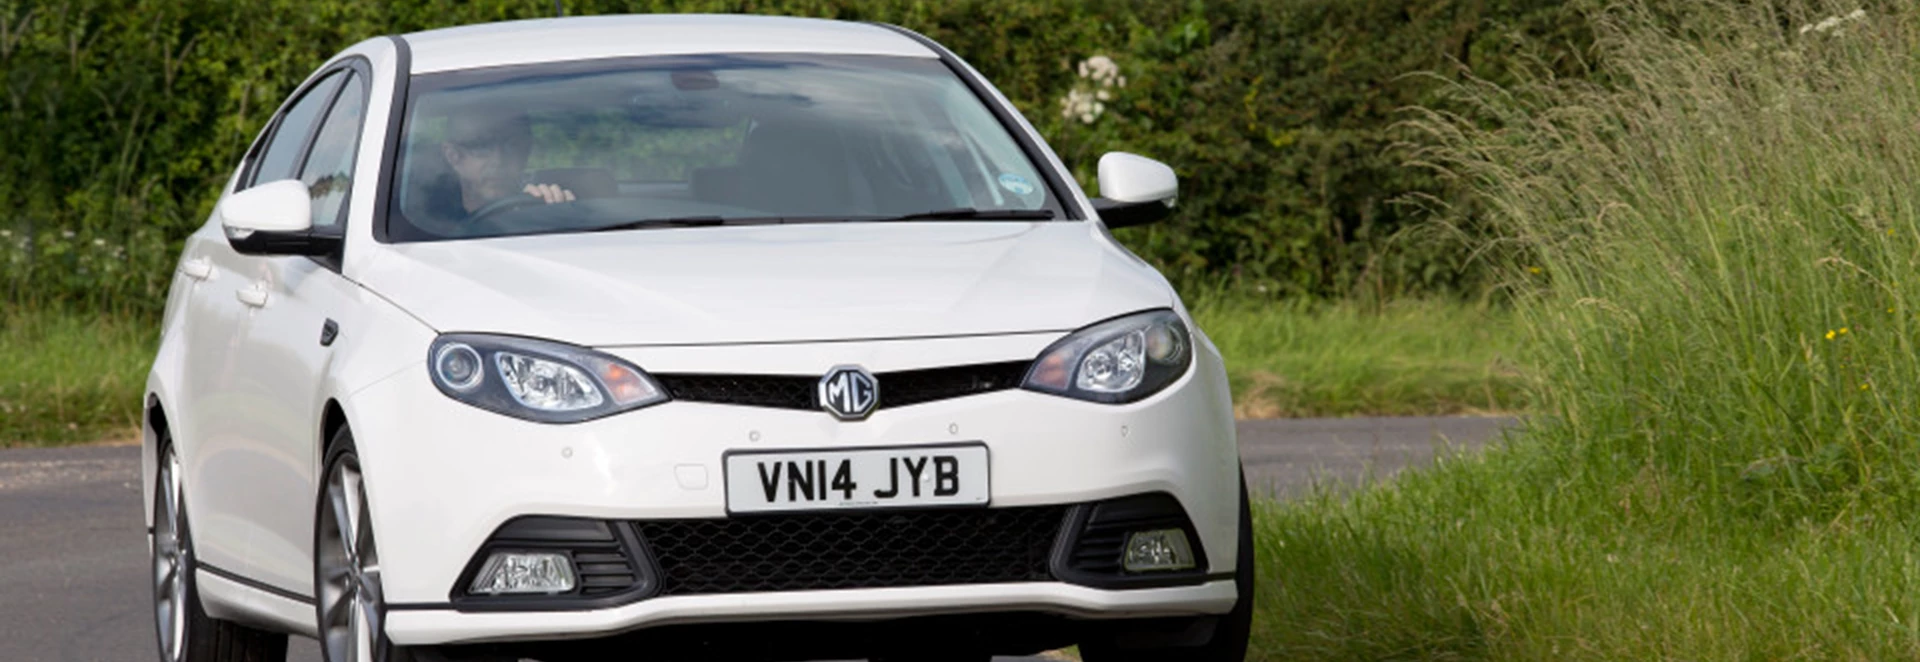 MG6 axed from the UK 